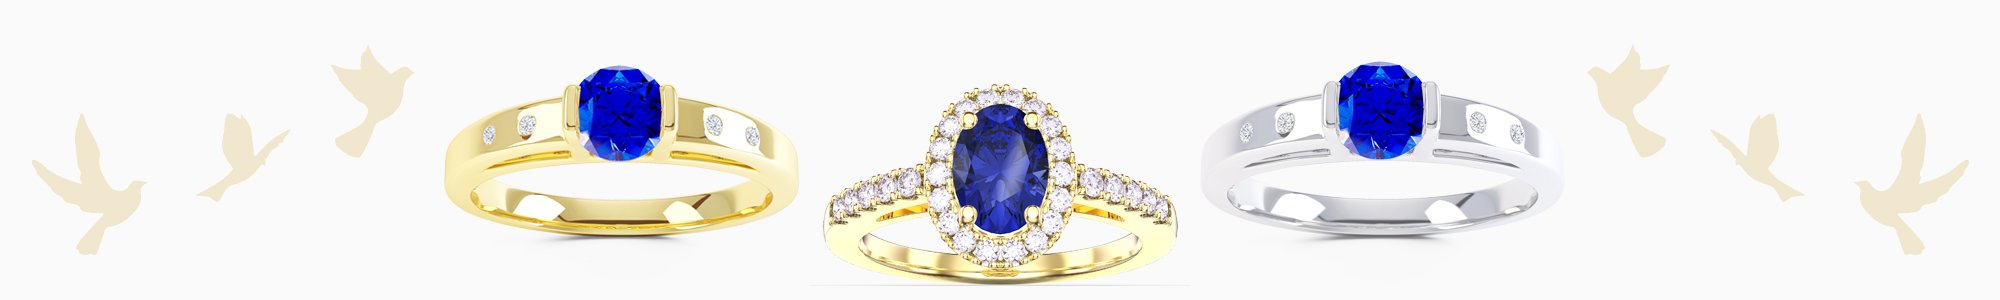 Shop Sapphire Rings by Jian London. Buy direct and save from our wide selection of Sapphire Rings at the Jian London jewellery Store. Free UK Delivery